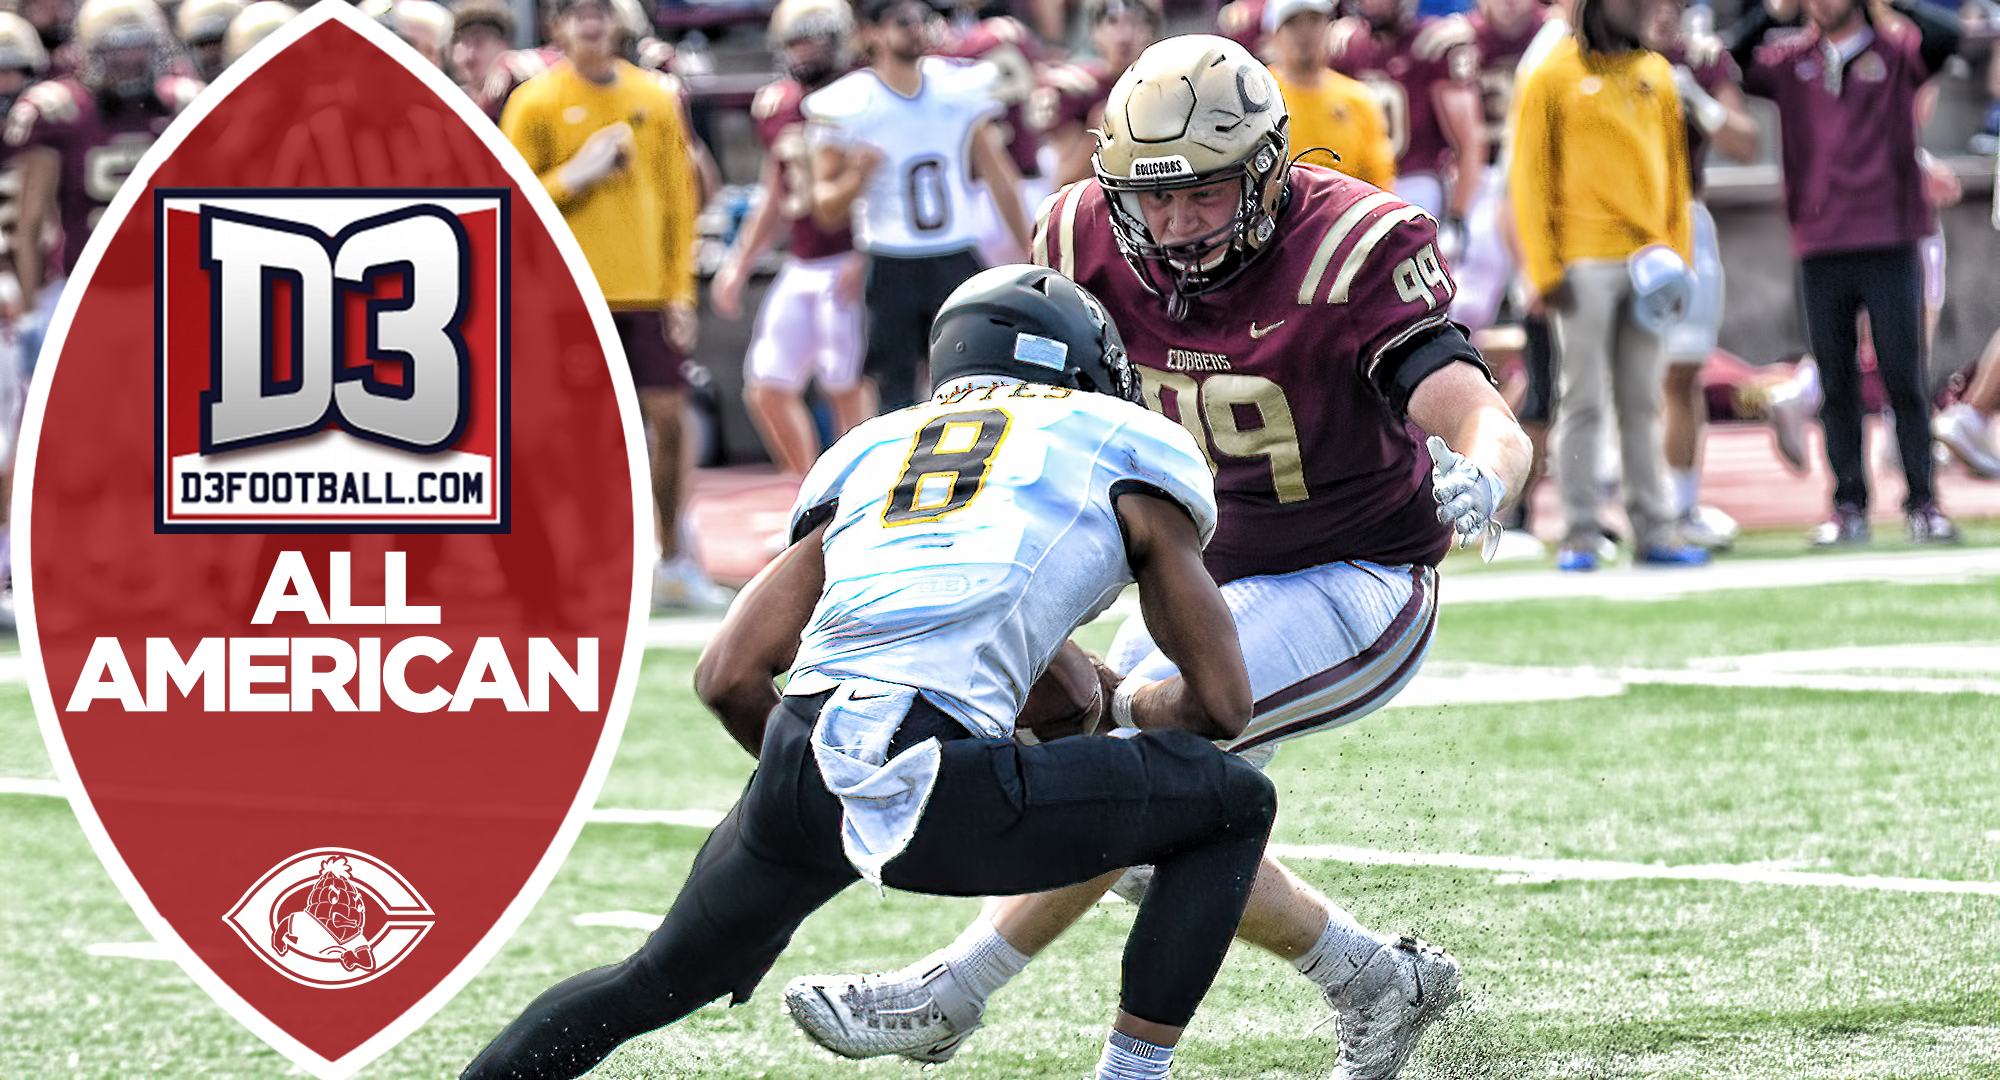 Collin Thompson was named to the D3football.com All-American Team. He becomes the 31st Concordia player to earn All-American honors.